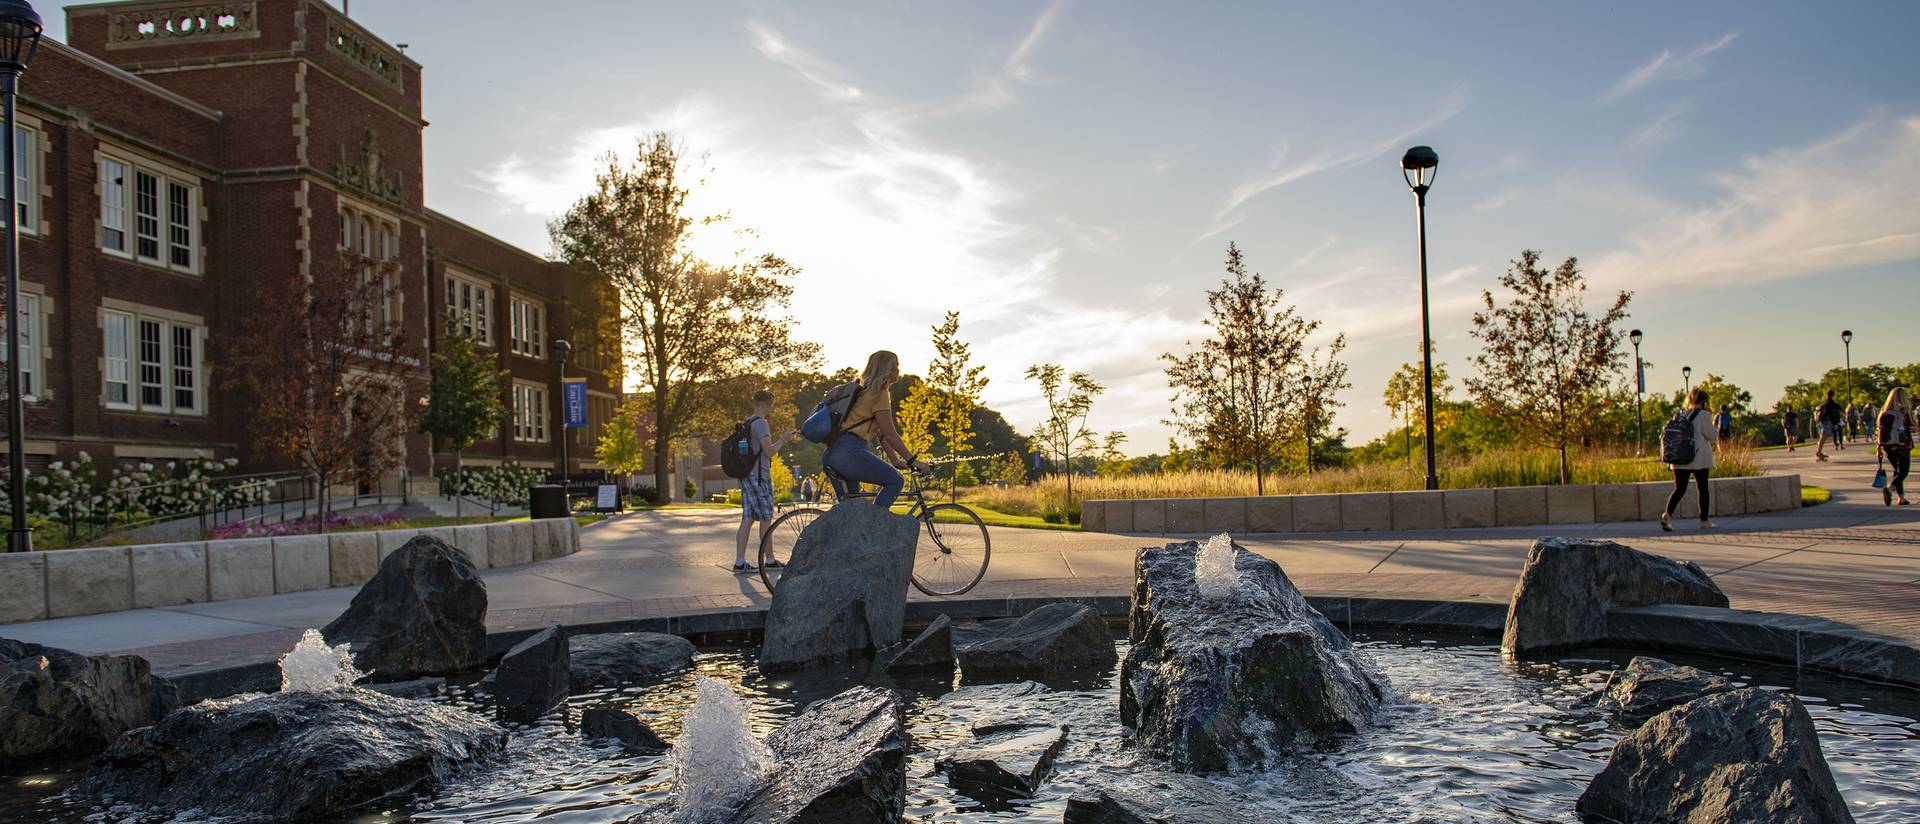 Students walk and bike next to the Stowe Fountain during a sunset on campus